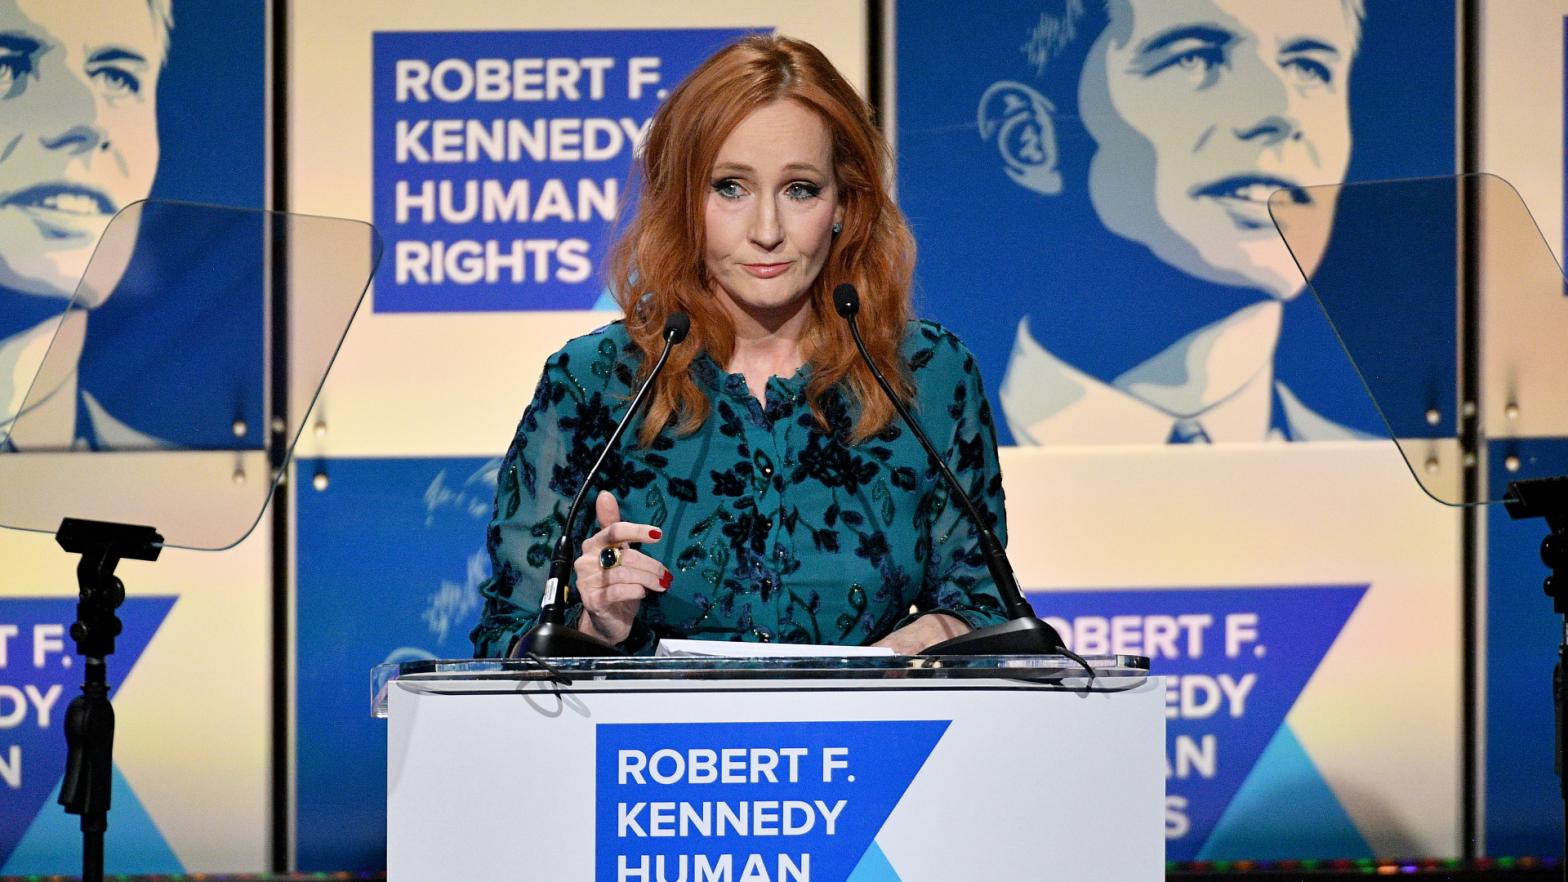 J.K. Rowling accepts an award from Robert F. Kennedy Human Rights in 2019 which, yeah, yikes. (Photo:  Dia Dipasupil, Getty)